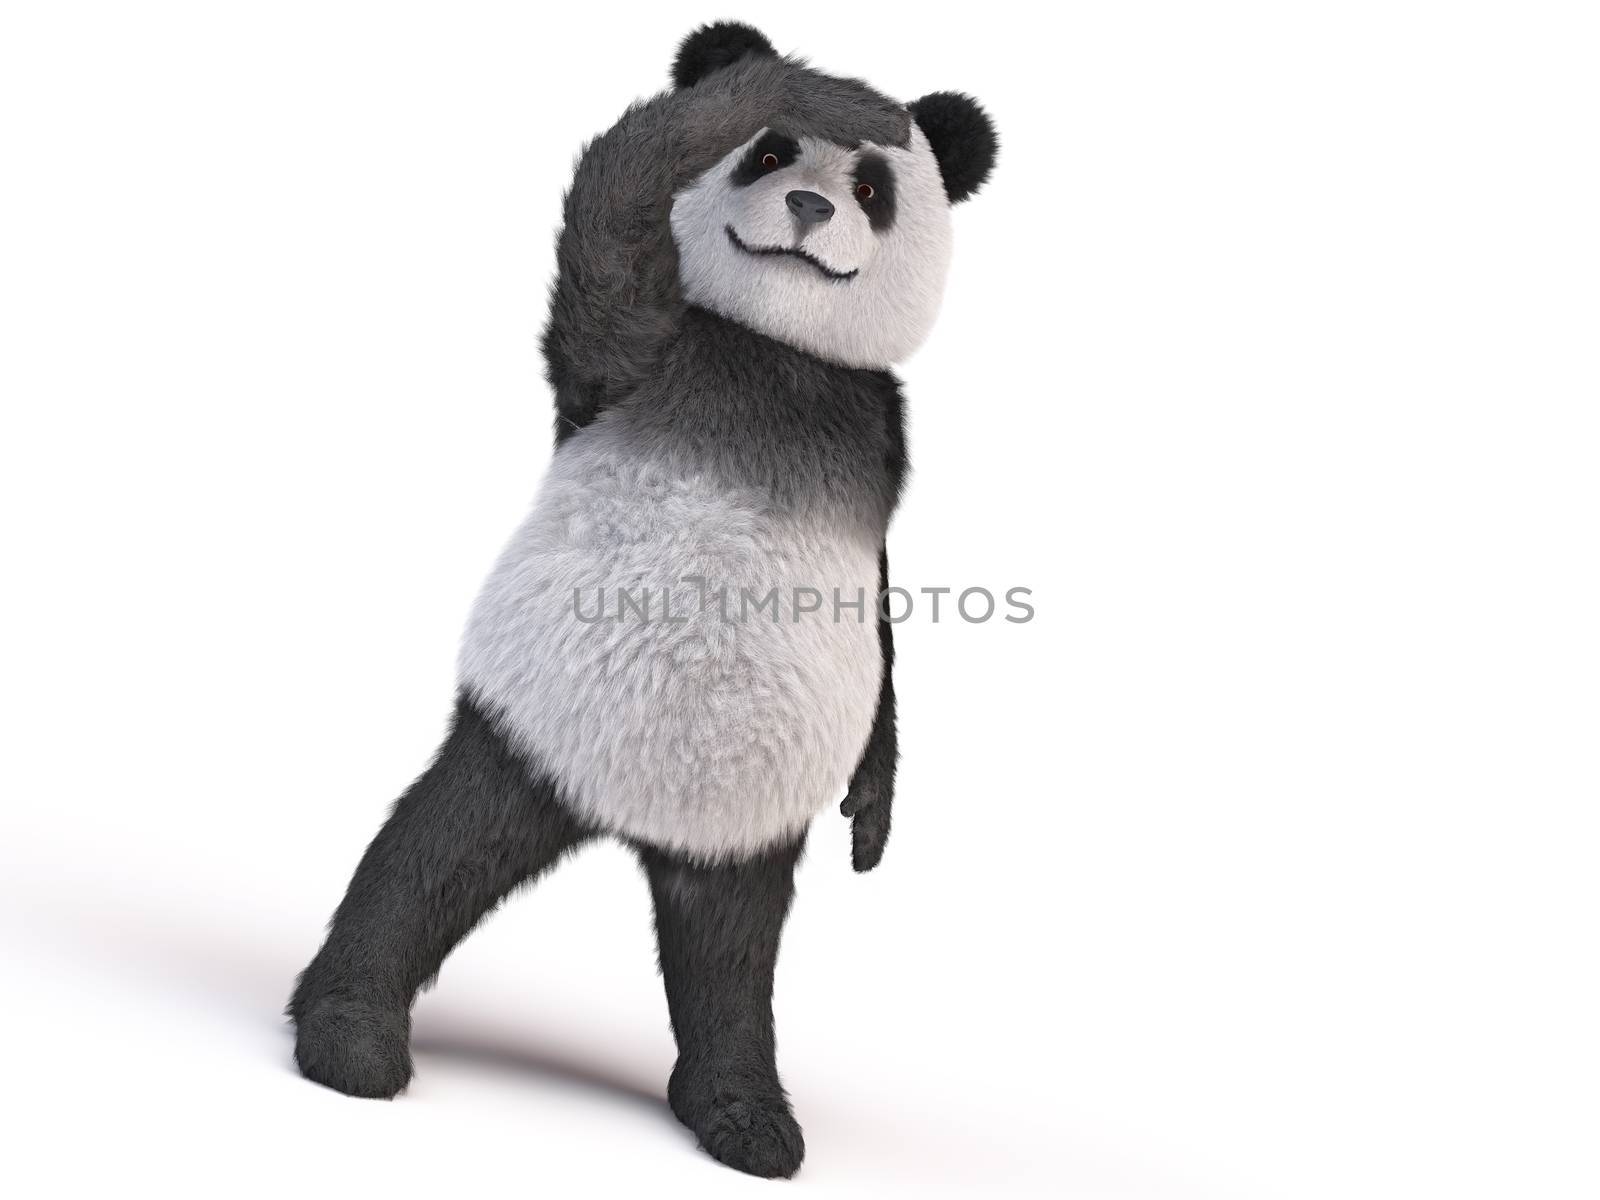 character doll giant panda looks afar closing his hand eyelid. bamboo fluffy plush toy bear. the future of endangered species. cover eyes from the sun with his paw. character looks into the distance